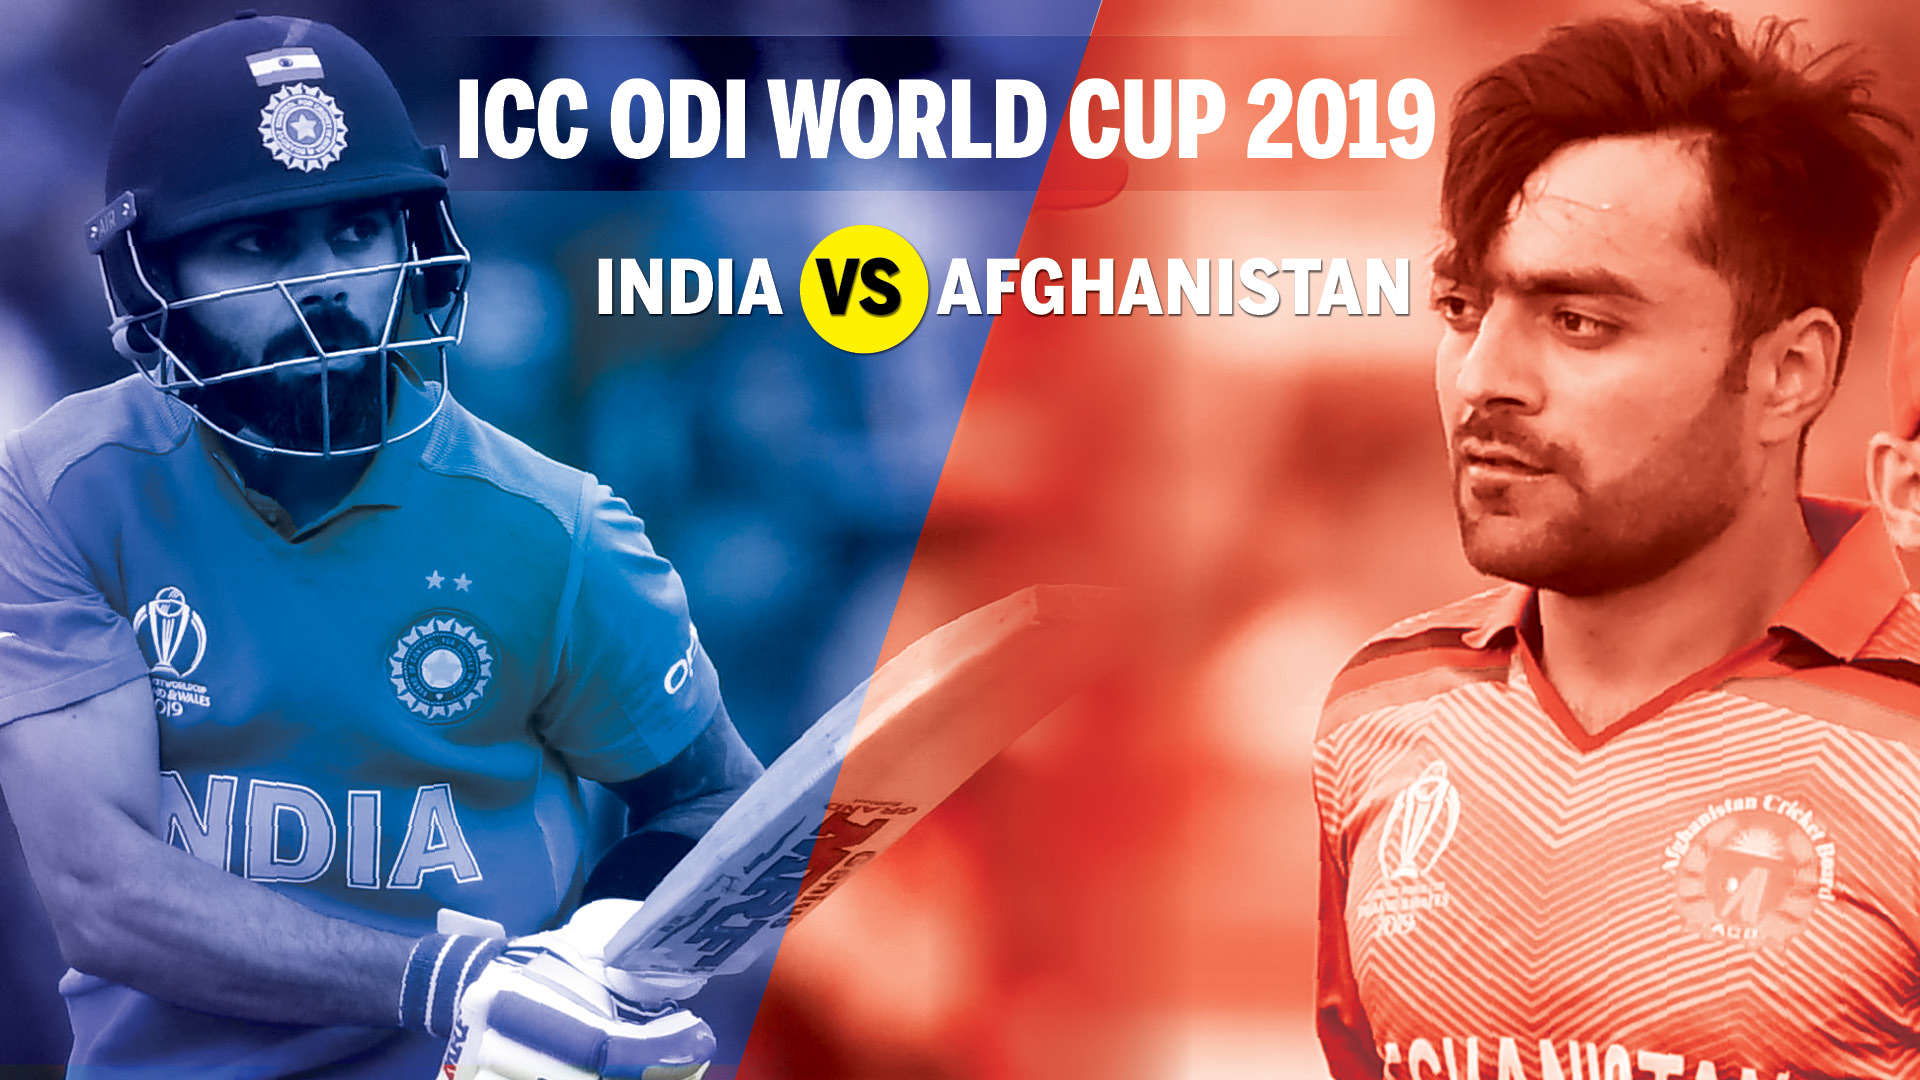 India vs Afghanistan Cricket Match World Cup 2019